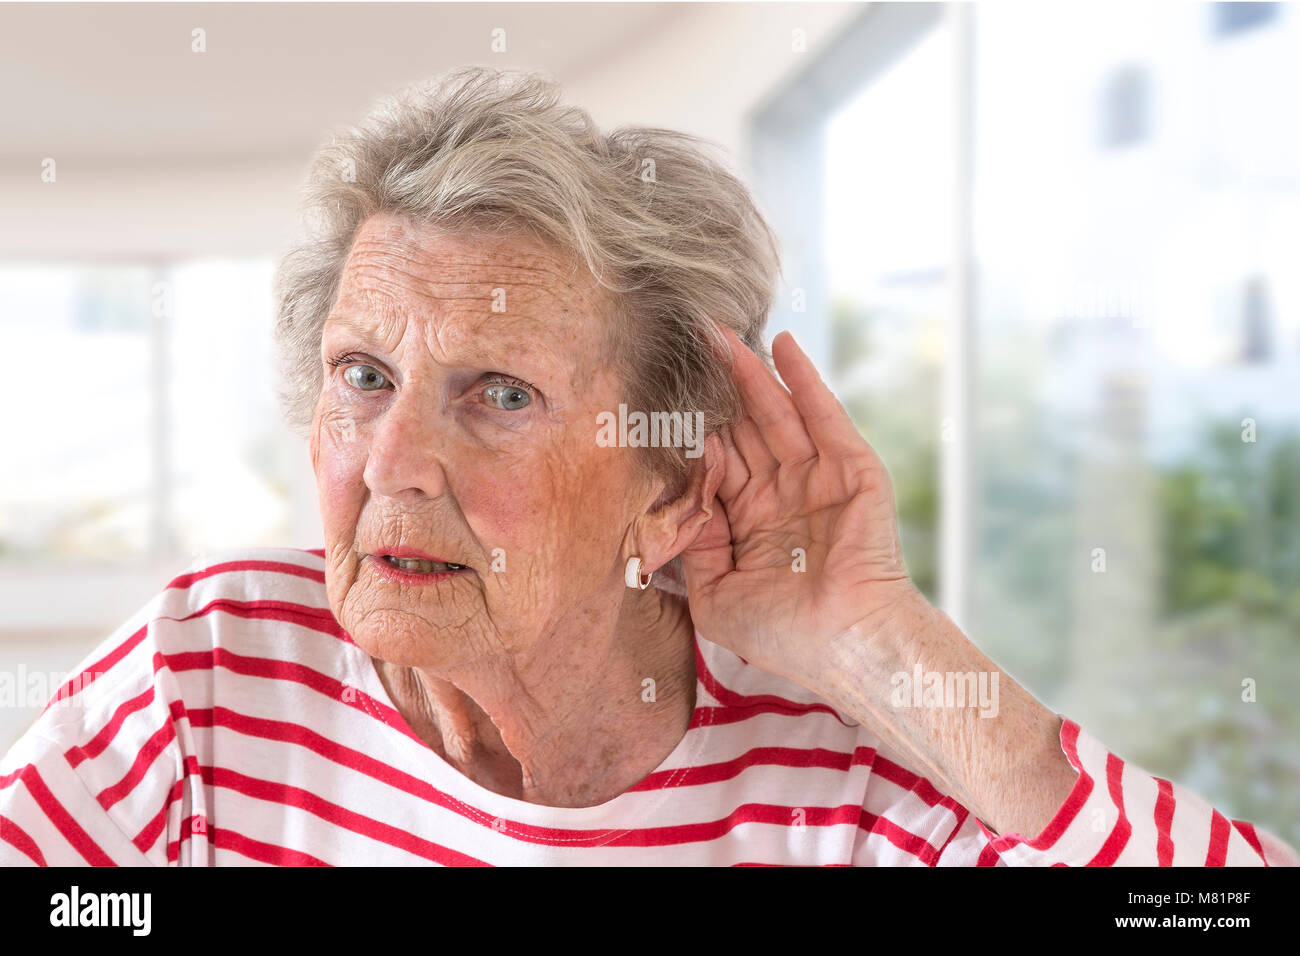 Elderly lady with hearing problems due to ageing holding her hand to her ear as she struggles to hear, profile view on large windows background Stock Photo